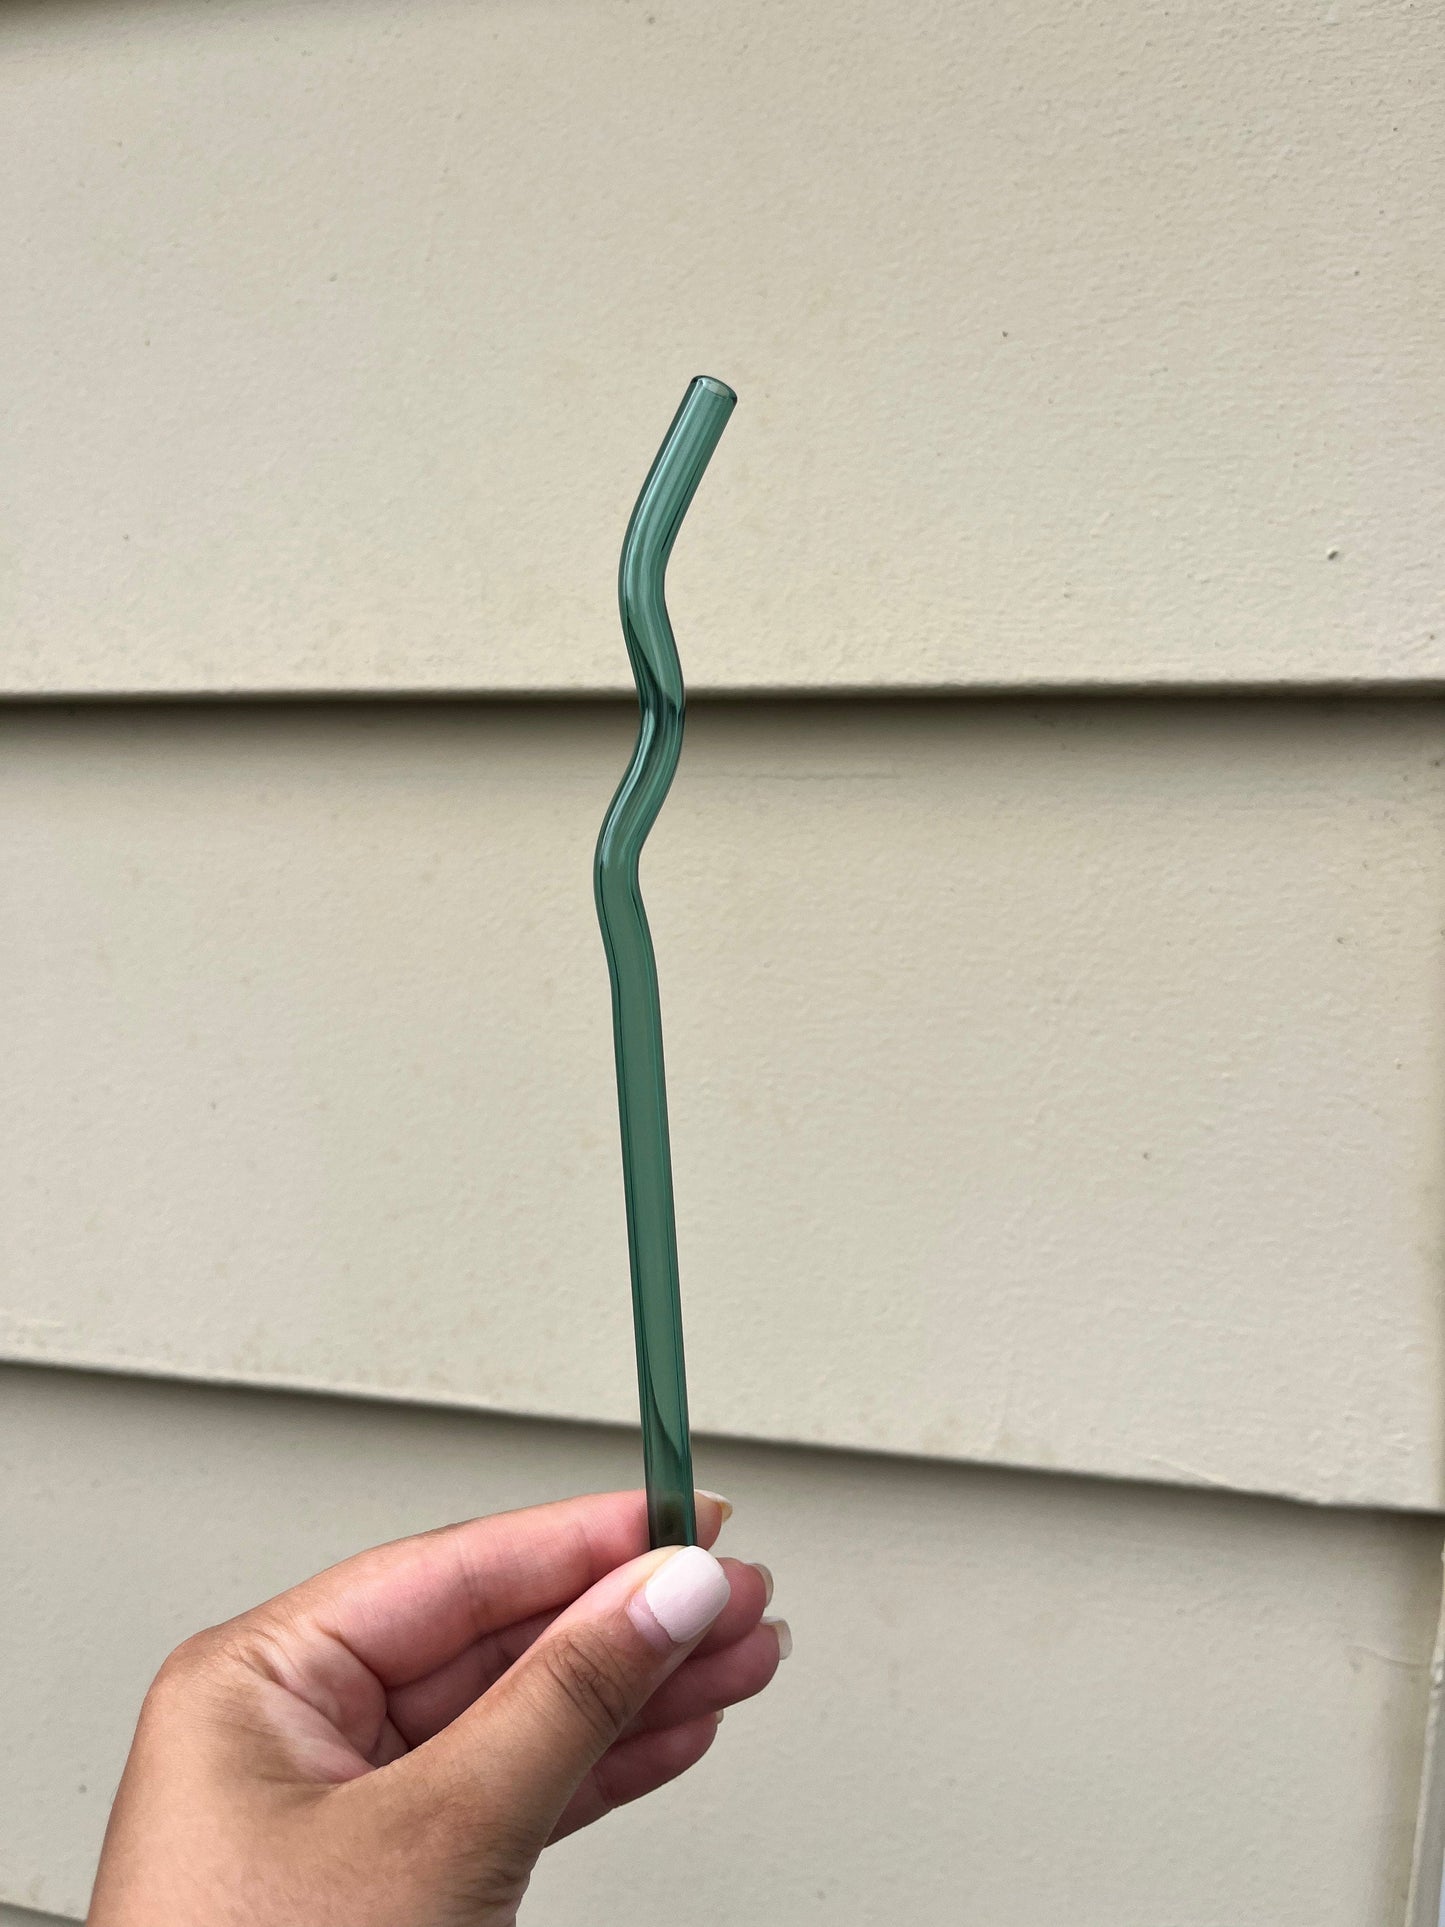 Teal (Blue/Green) Squiggly Glass Straws